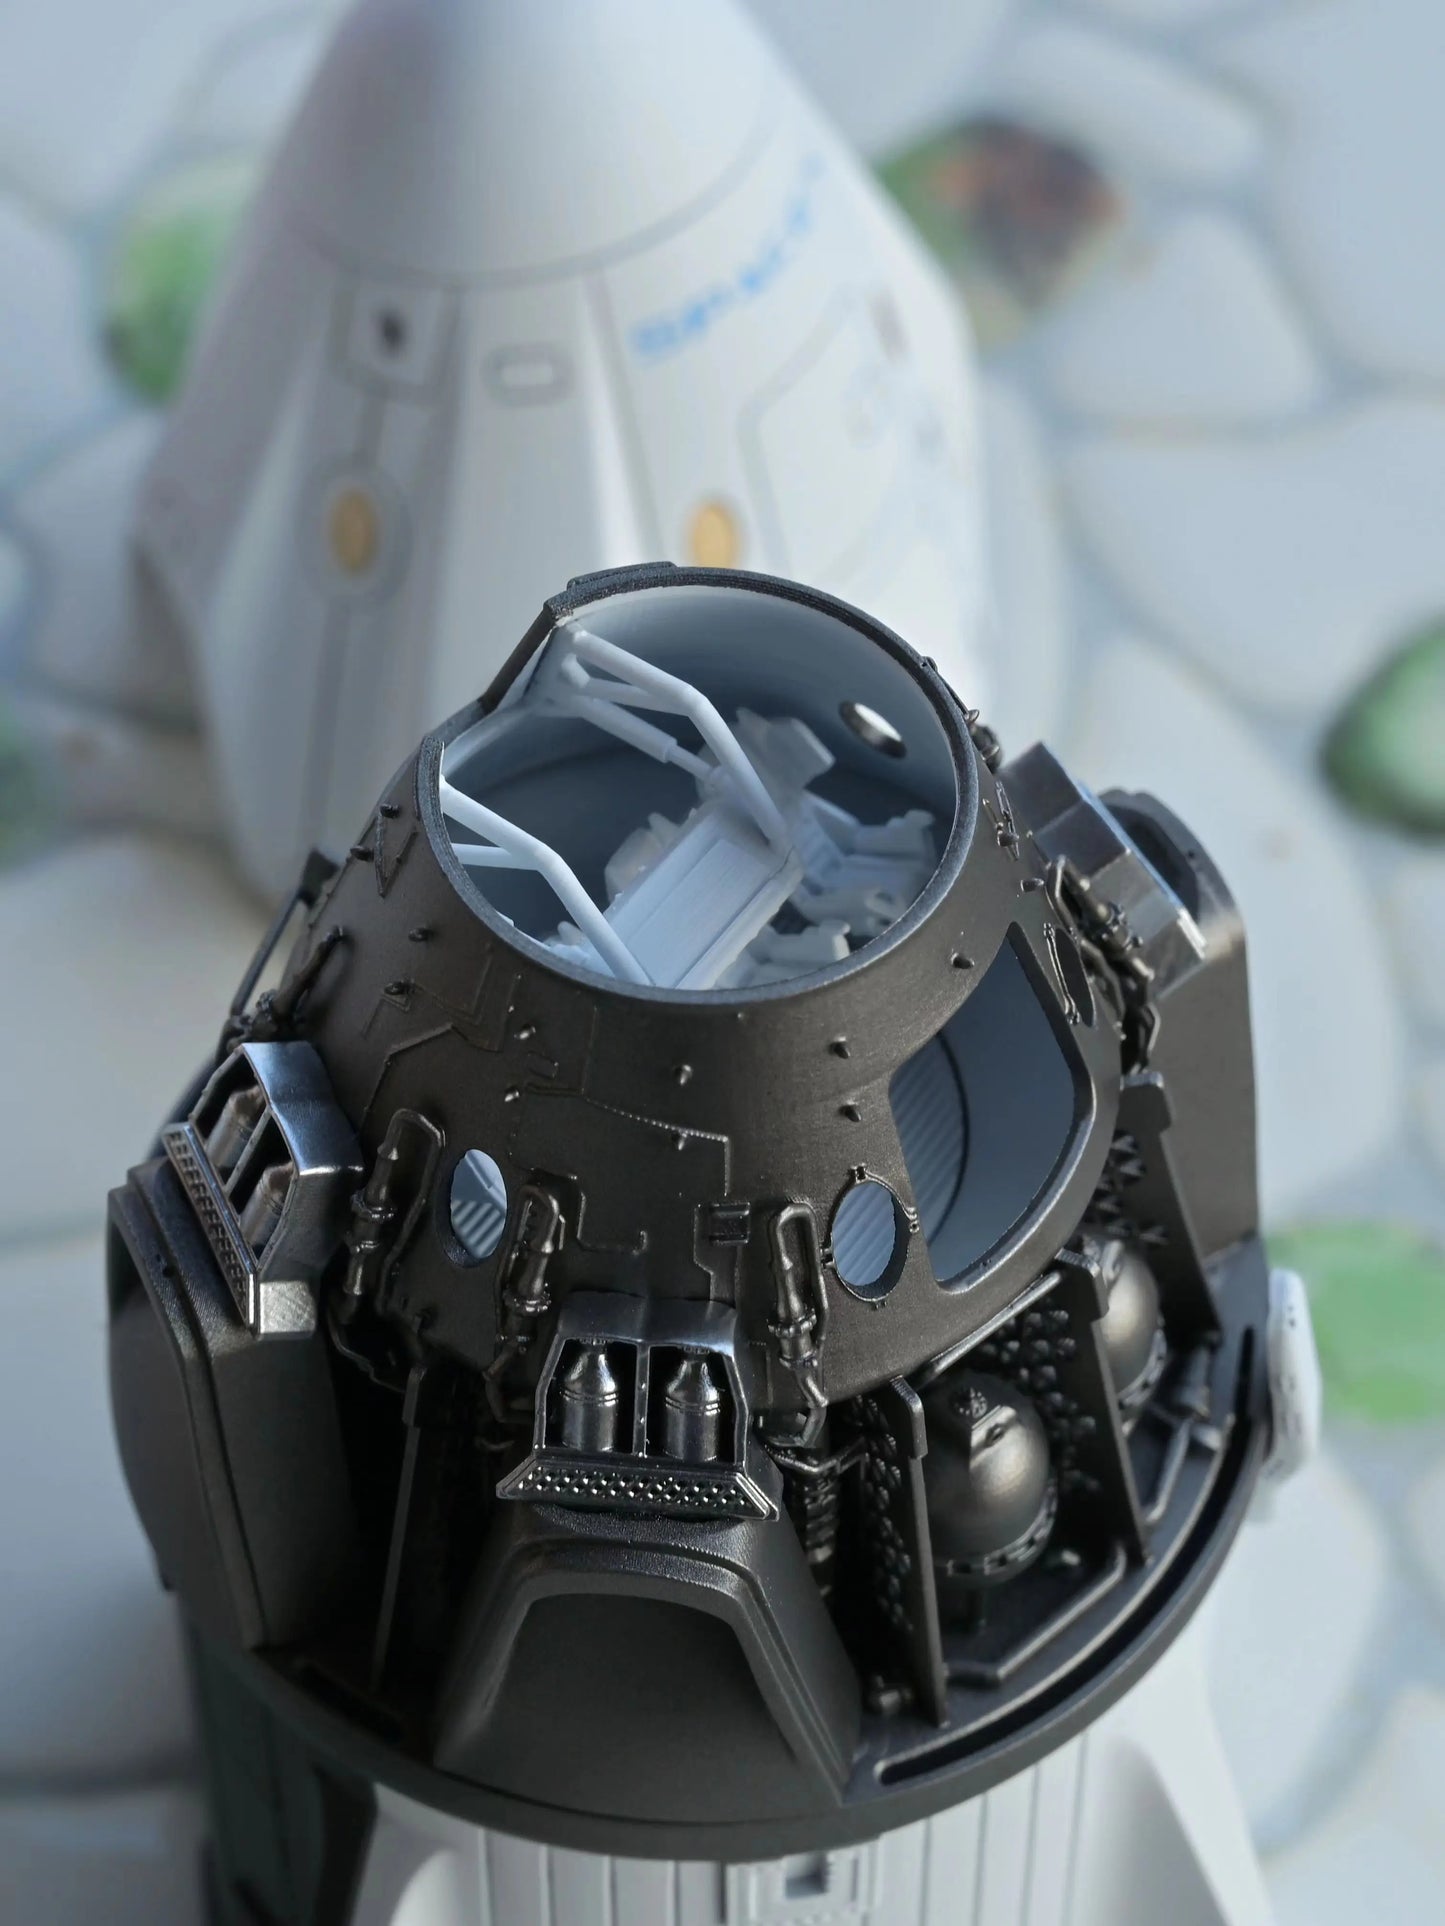 SpaceX Crew Dragon model showing details of the capsule interior and life support system under the skin